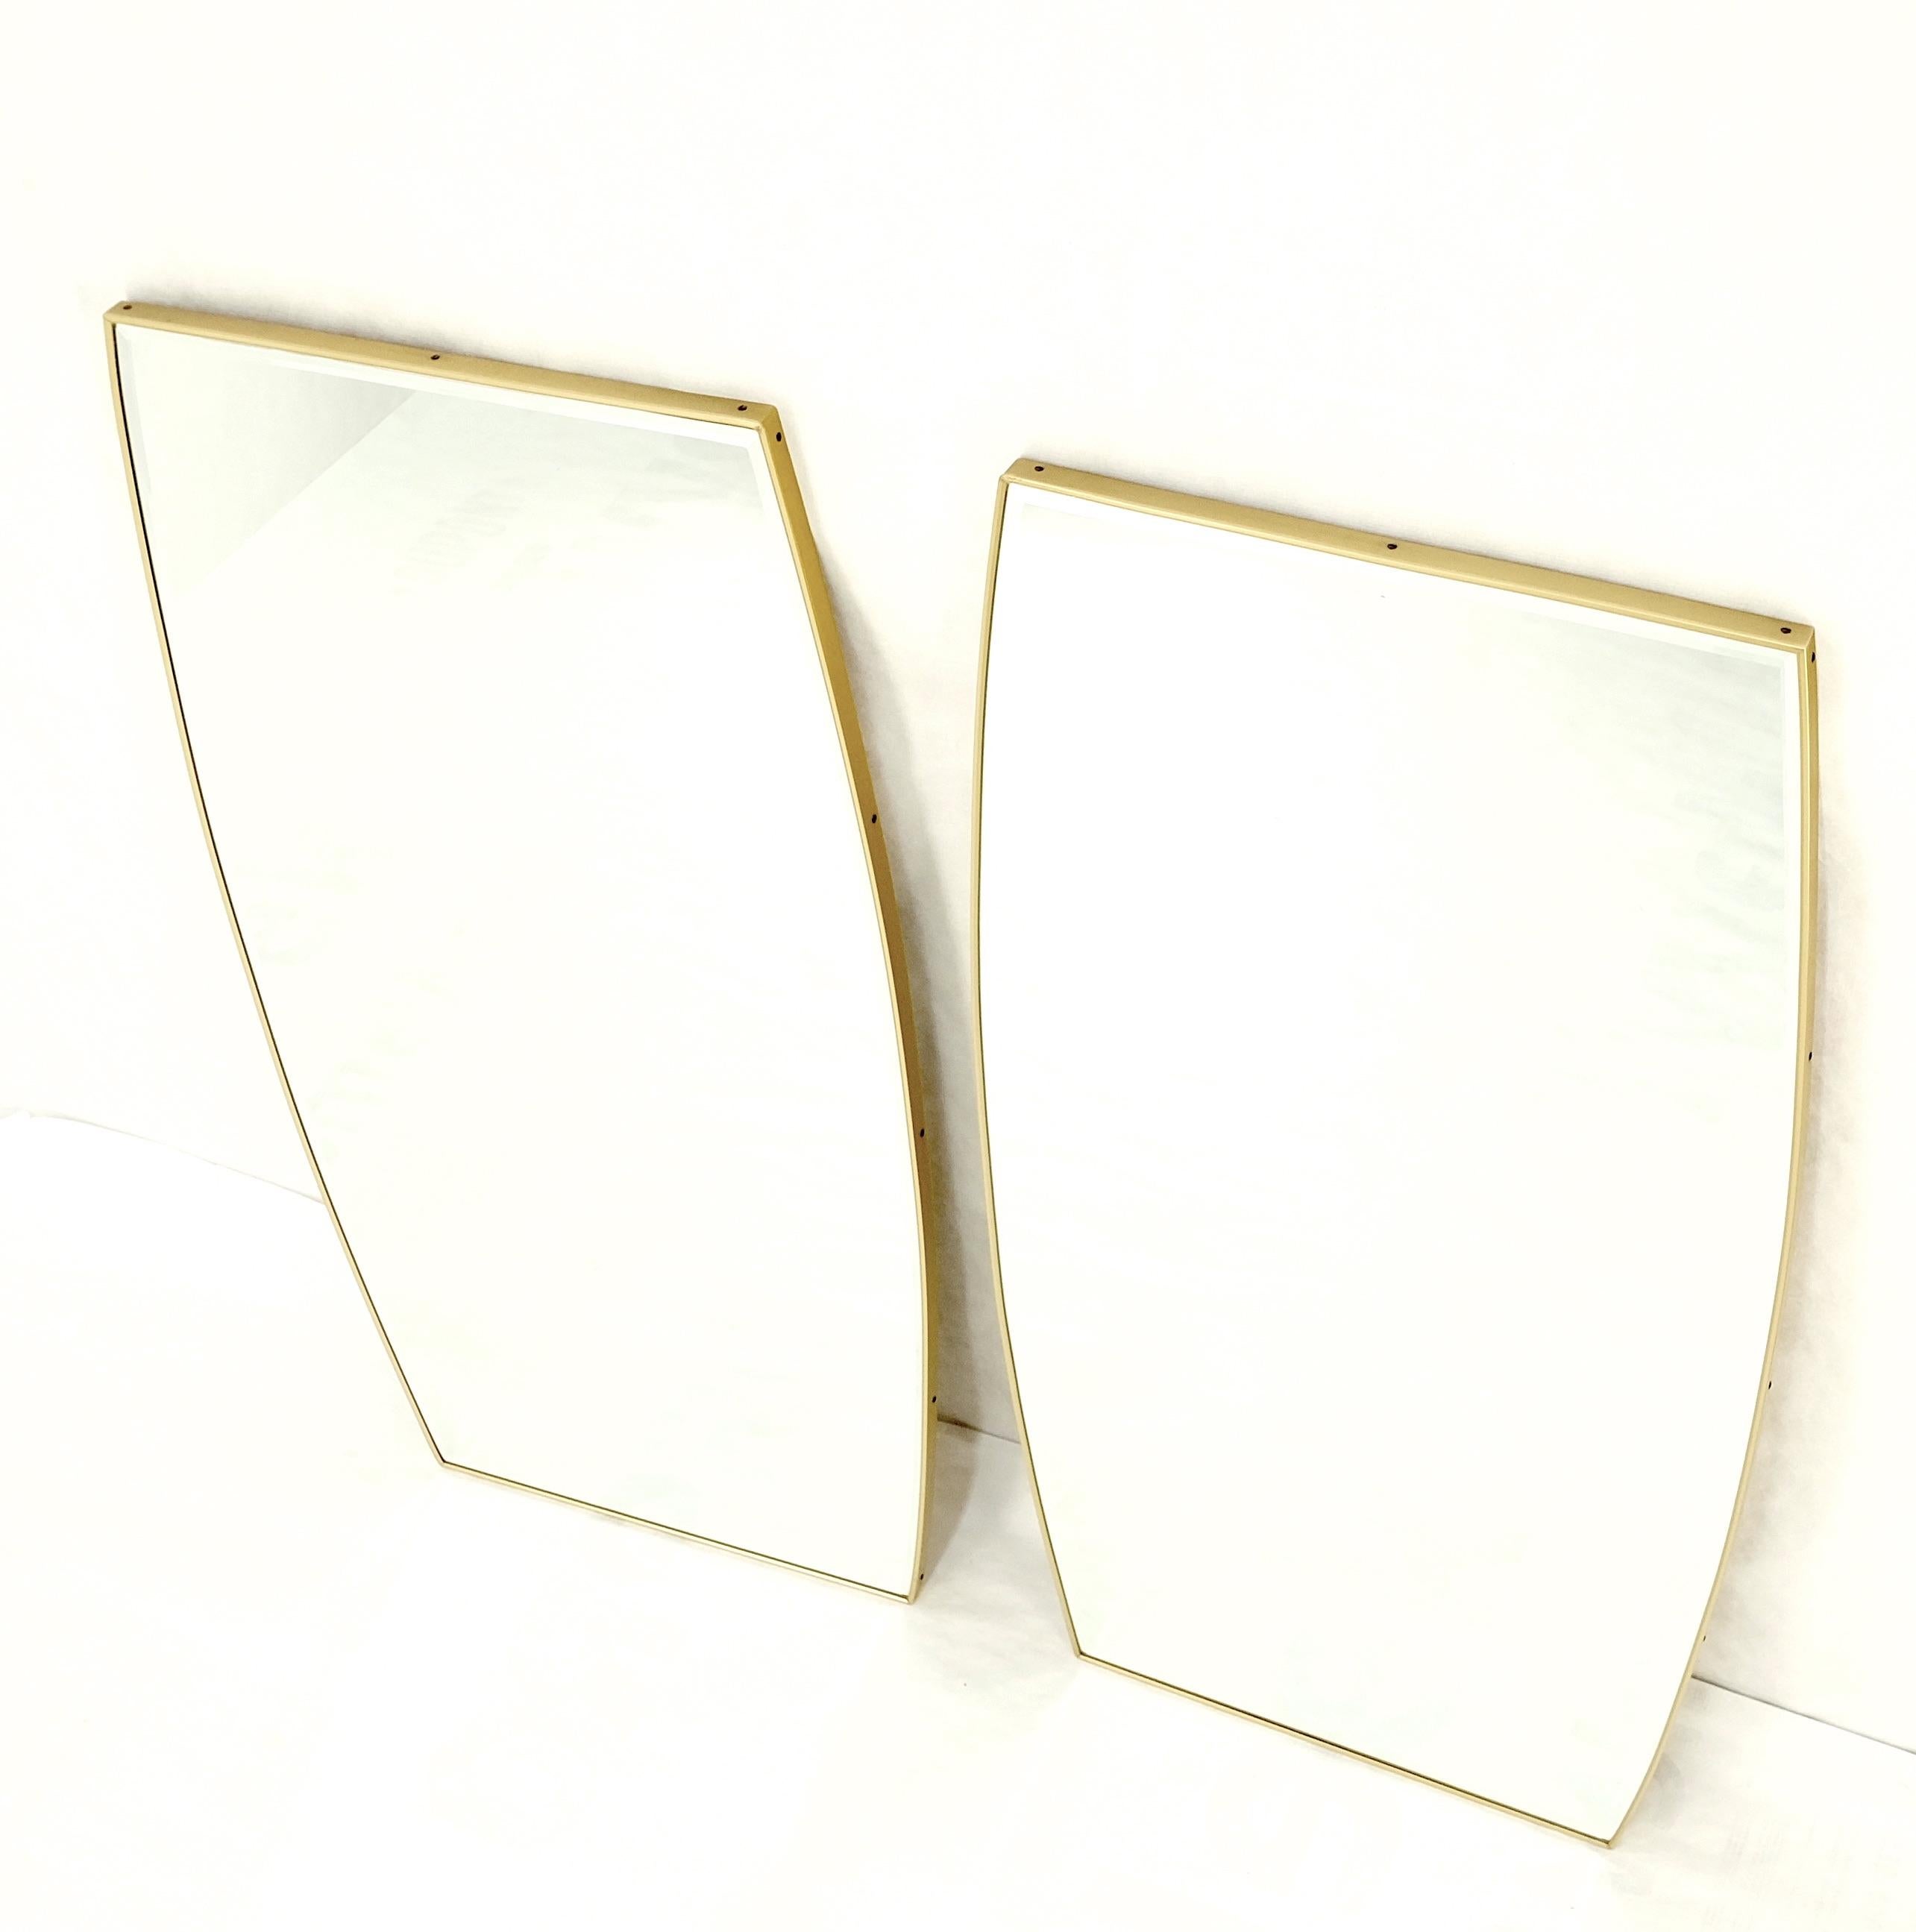 American Pair of 1970s Italian Mid Century Modern Boat Shape Brass Frames Mirrors MINT! For Sale